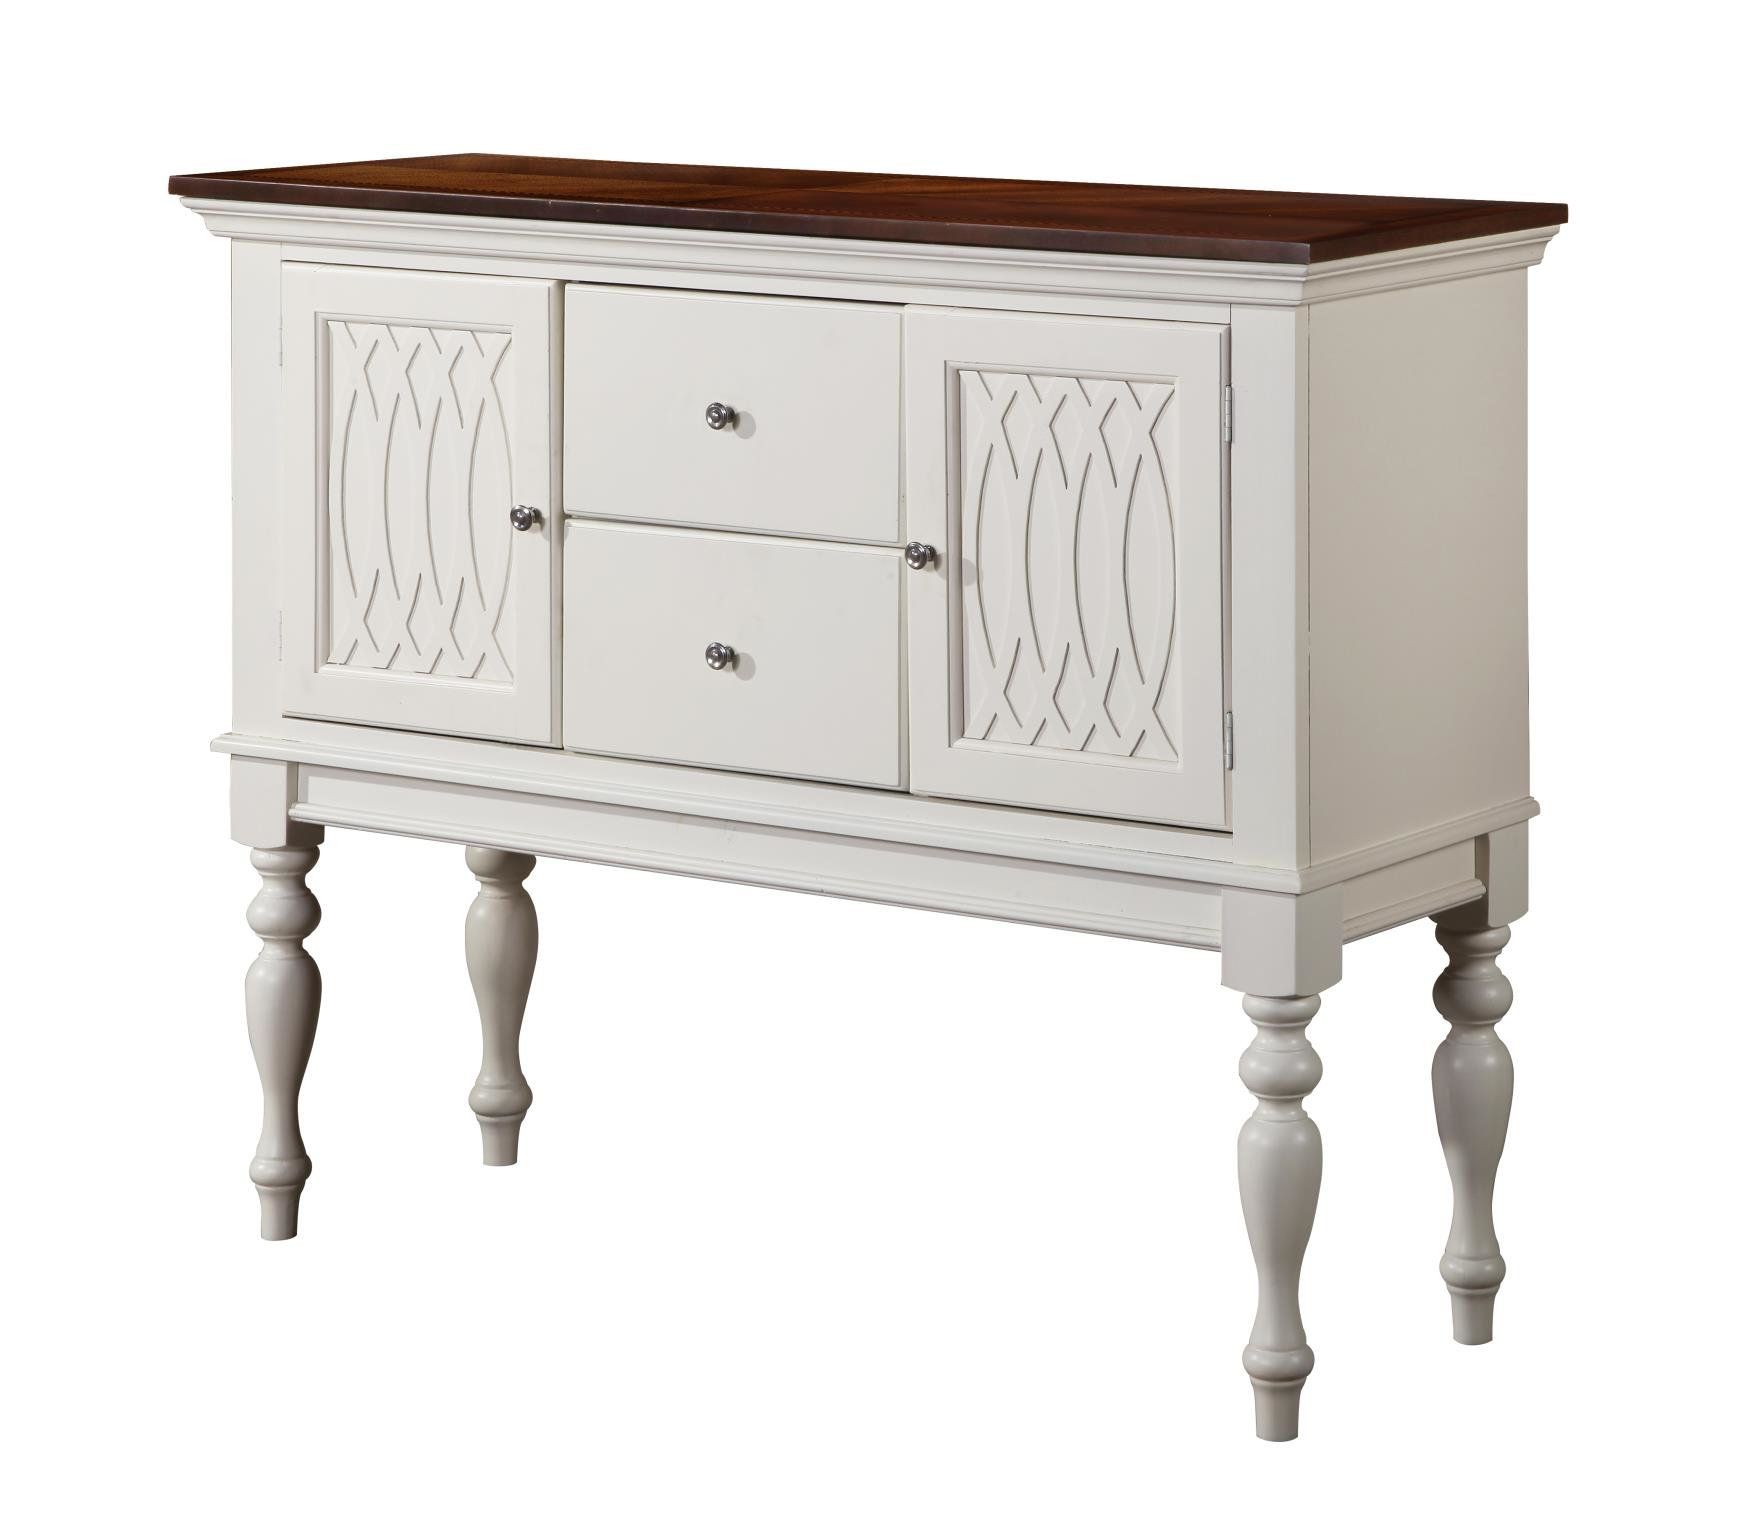 Hillenbrand Upholstered Buffet Table Intended For Pineville Dining Sideboards (View 16 of 20)